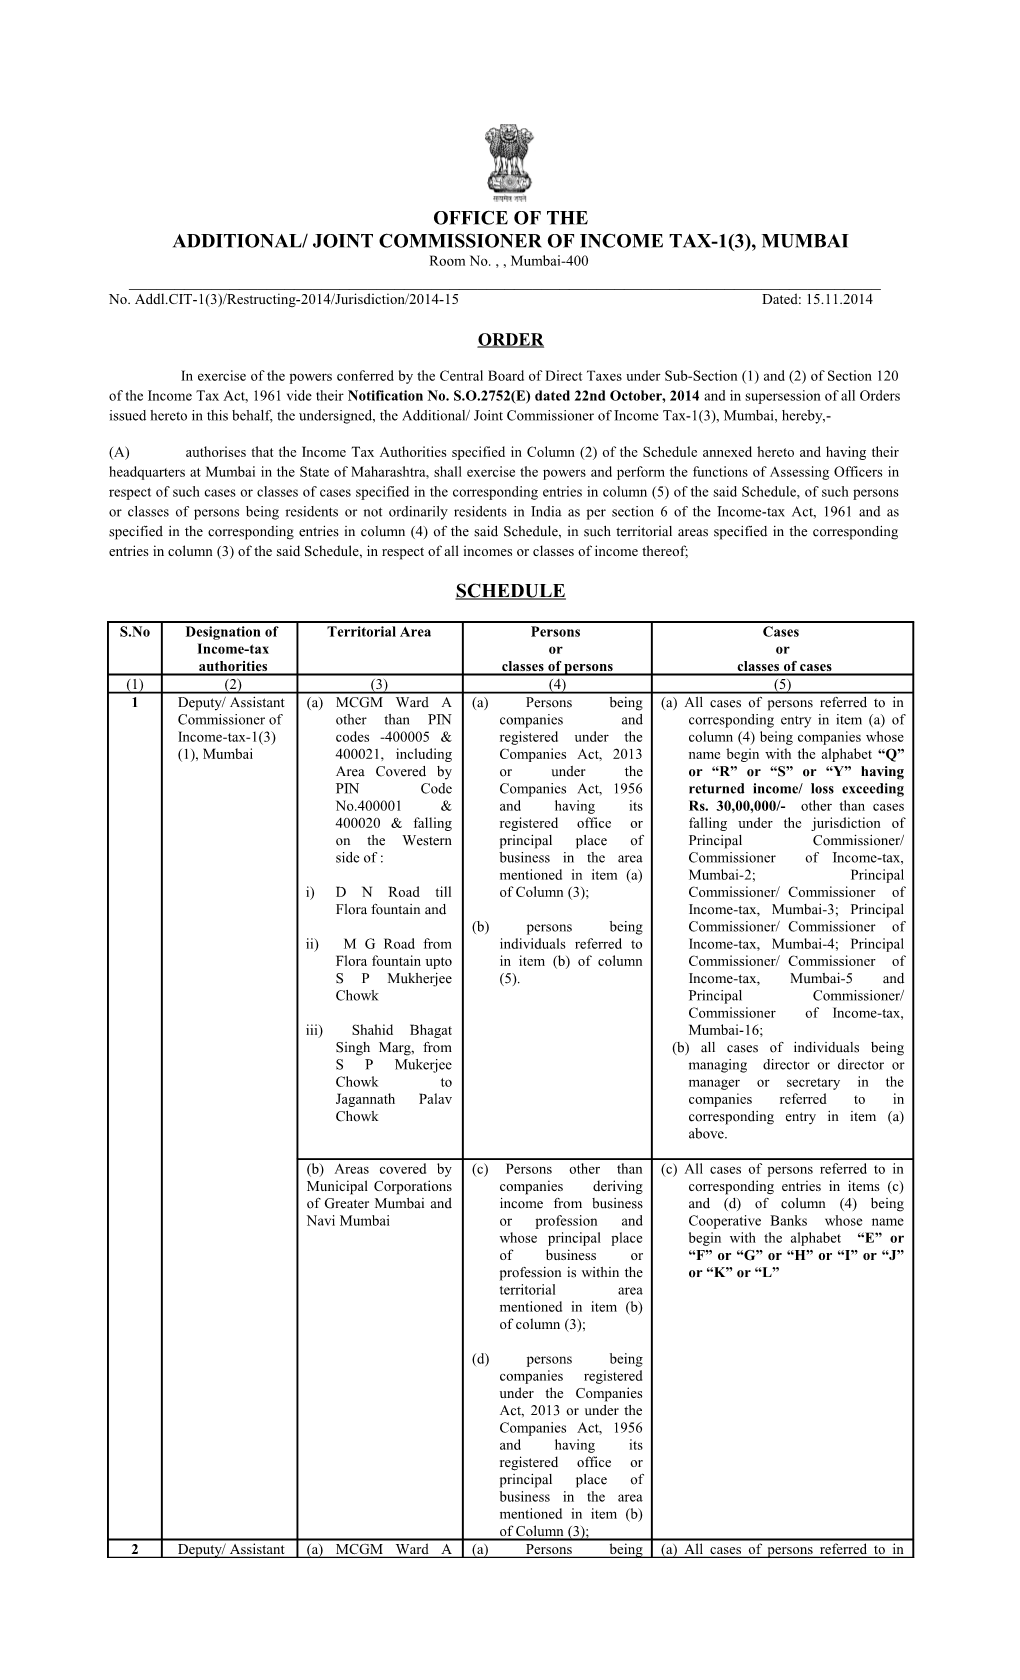 Additional/ Joint Commissioner of Income Tax-1(3), Mumbai